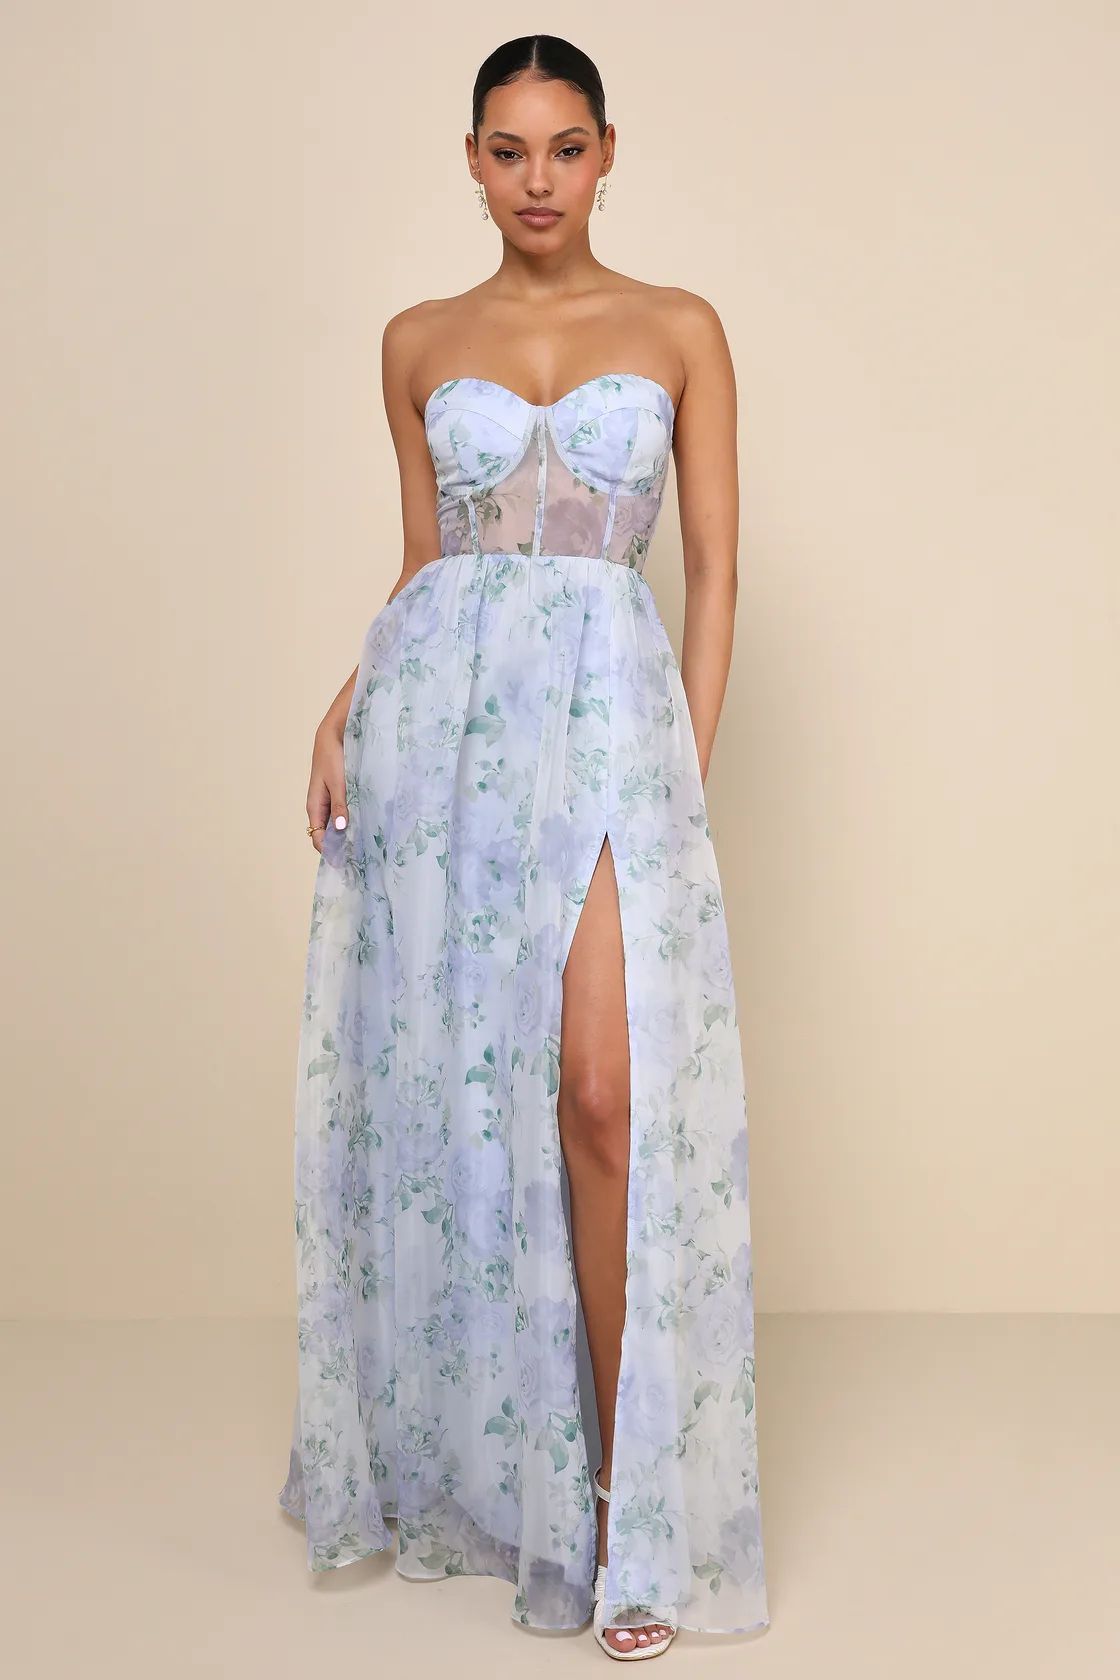 Charming Sweetness Periwinkle Floral Organza Bustier Maxi Dress | Lulus